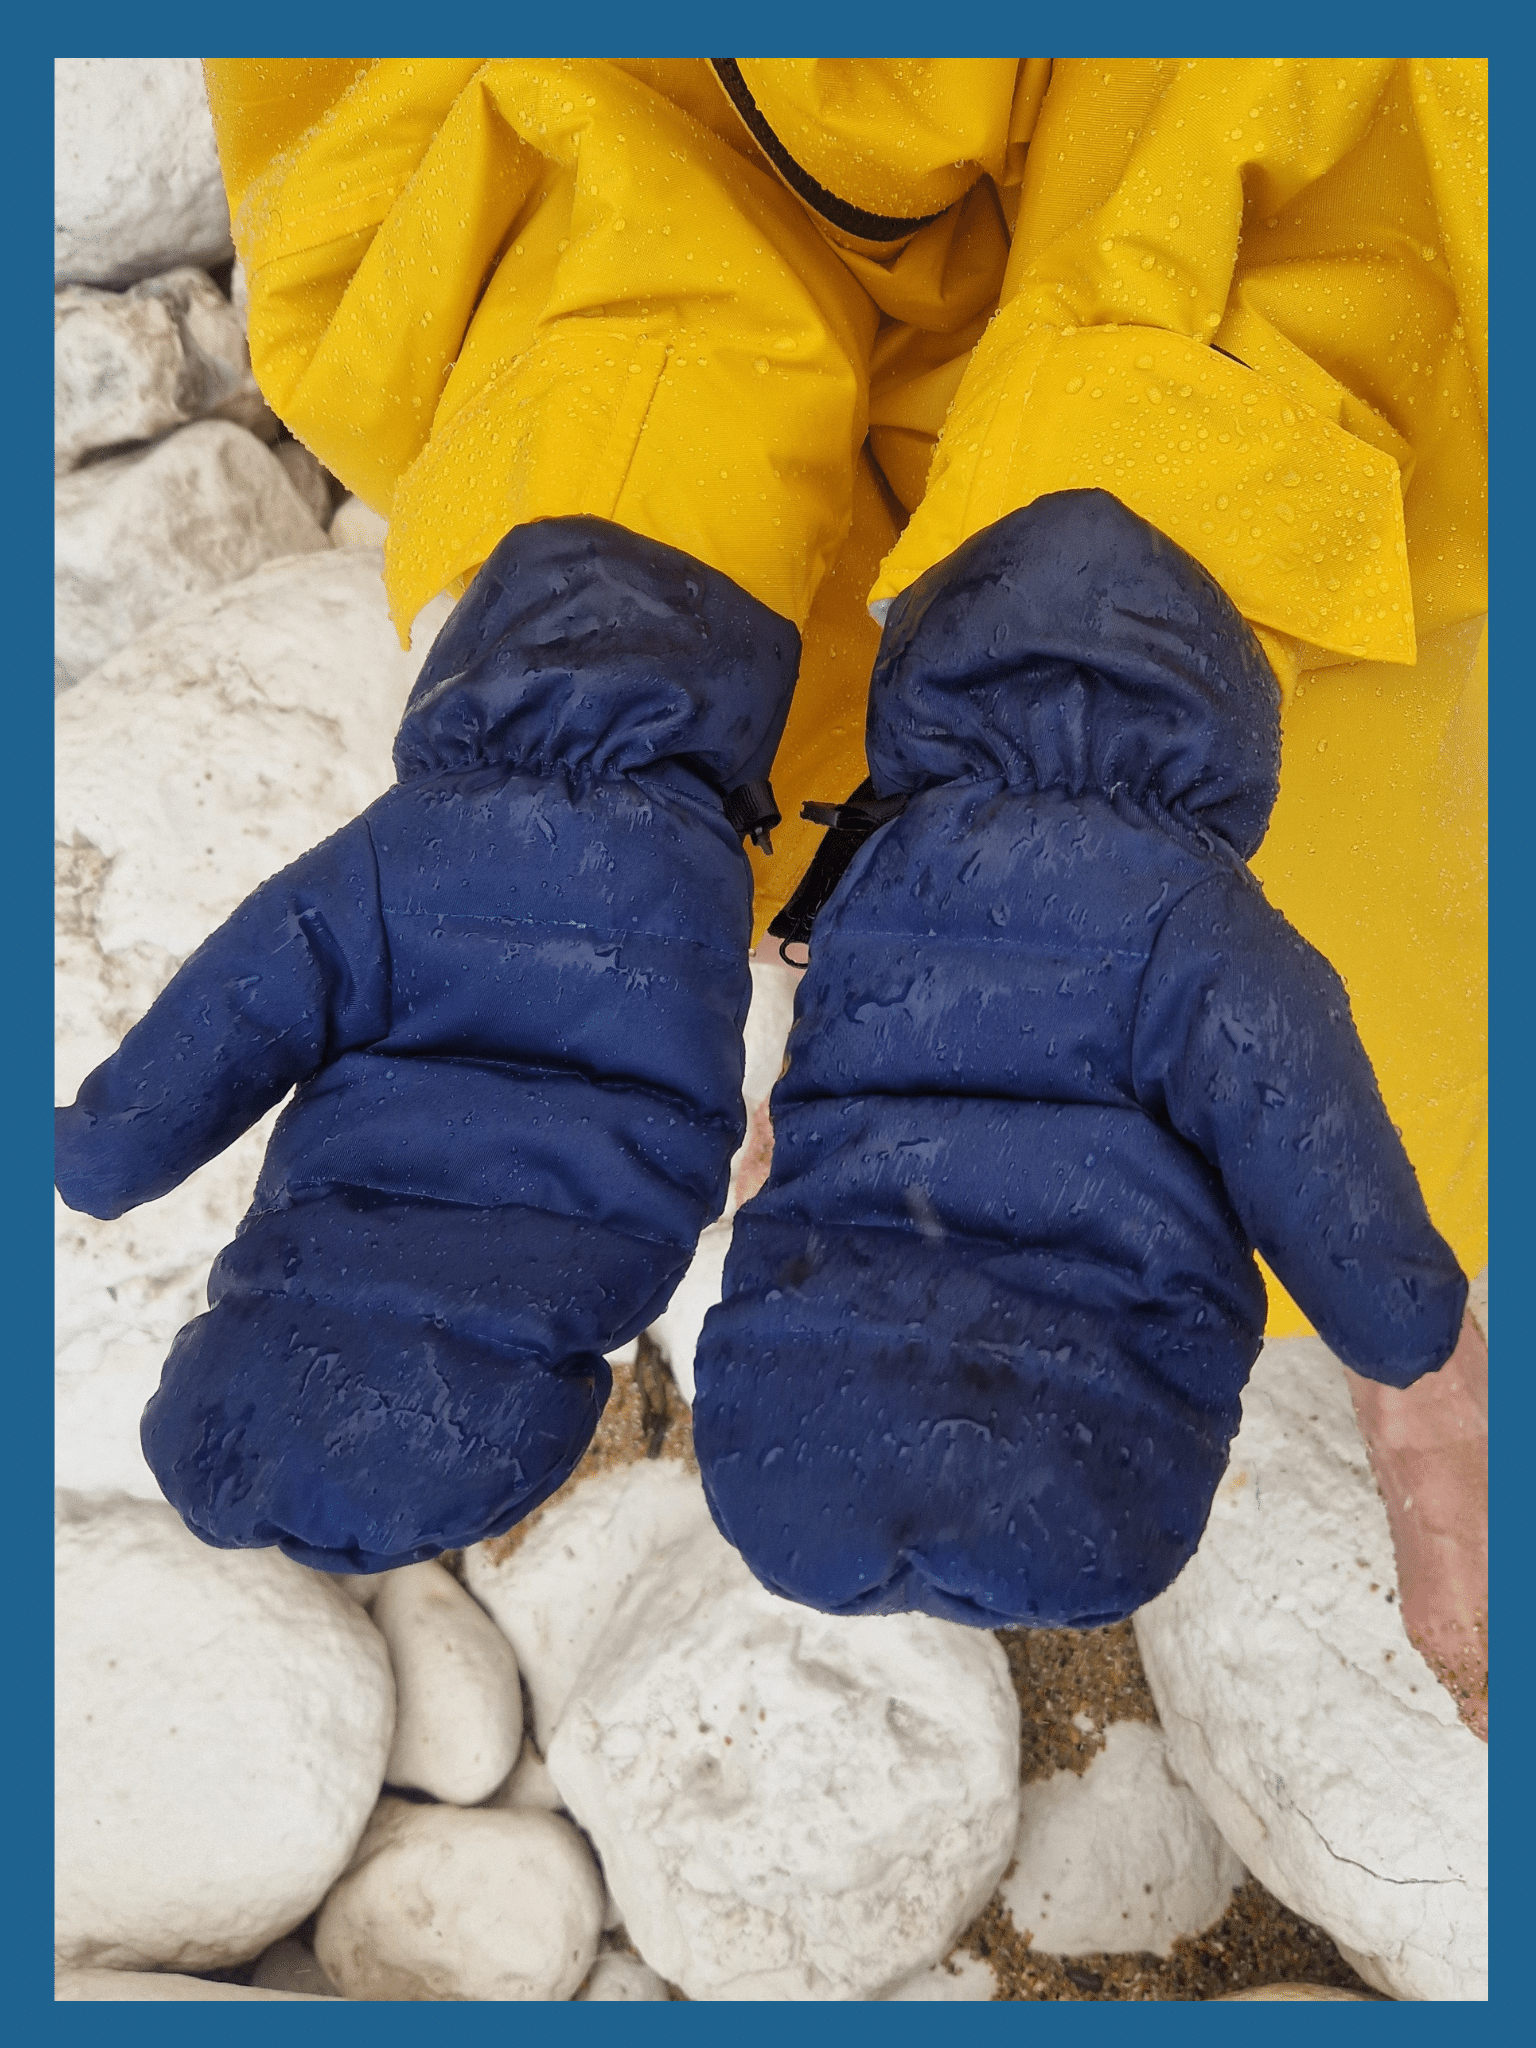 a close up shot of a pair of navy coloured waterproof mittens. You can see the moisture on the exterior of the gloves